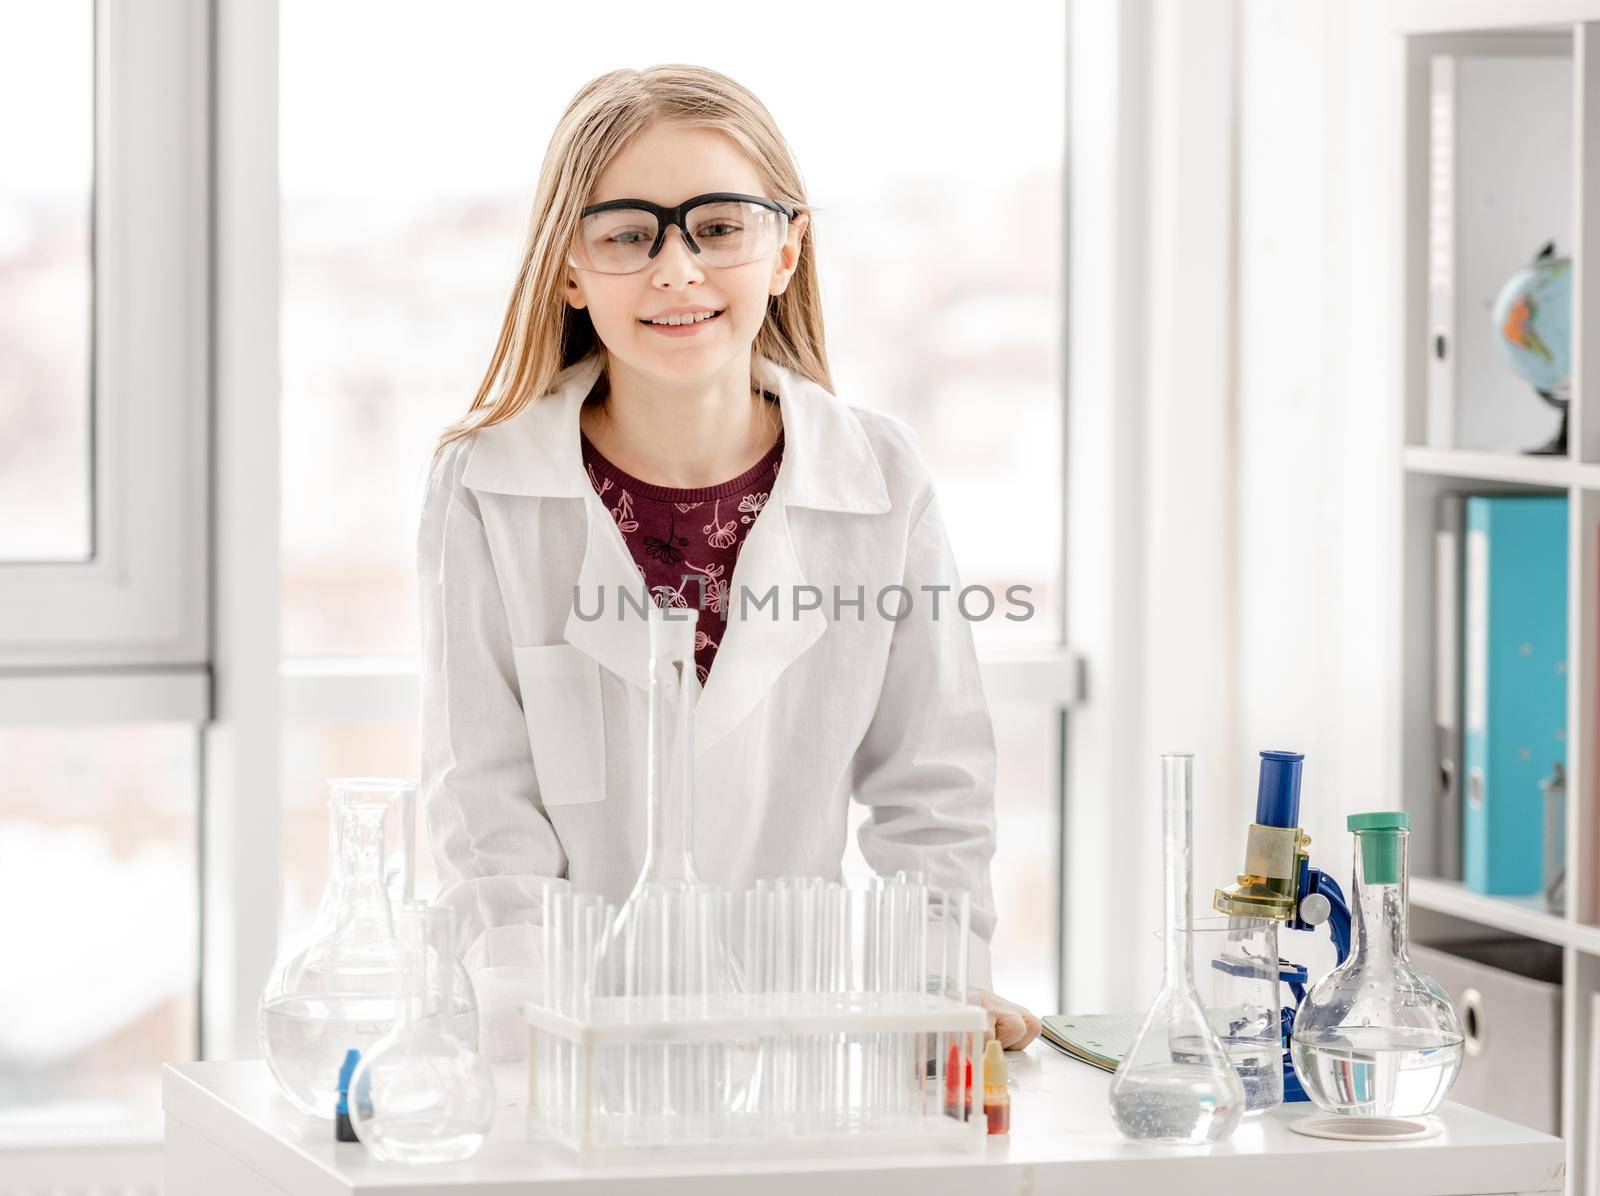 Smart girl during scientific chemistry experiment wearing protection glasses. Schoolgirl with equipment and chemical liquids looking at camera